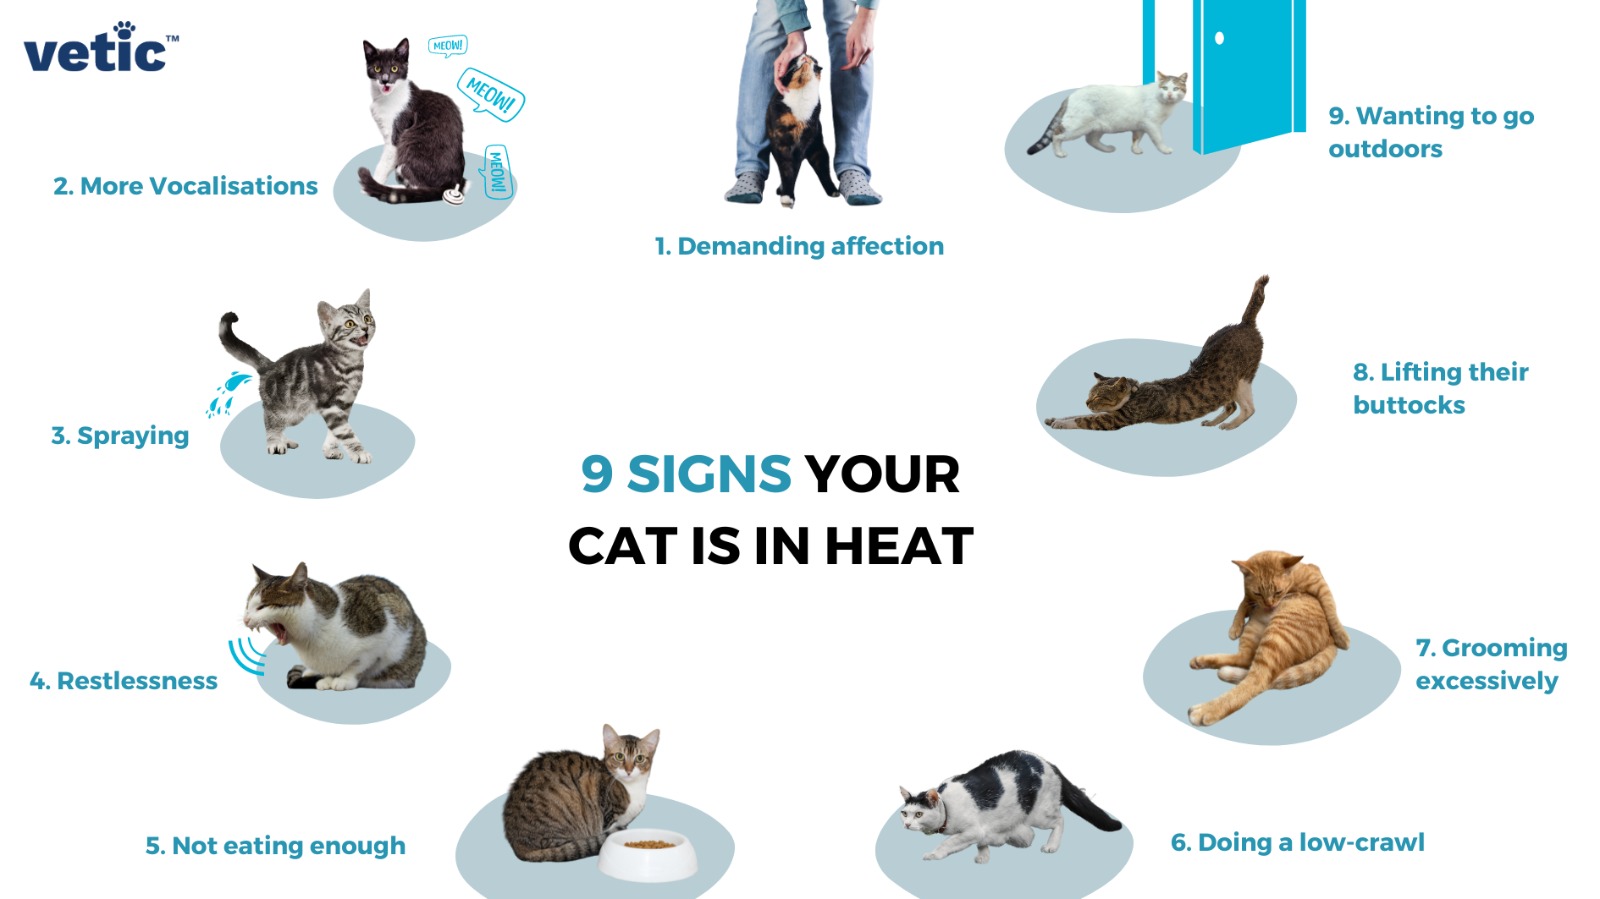 Cat in Heat: Have You Noticed The Signs of Heat in Your Cat?